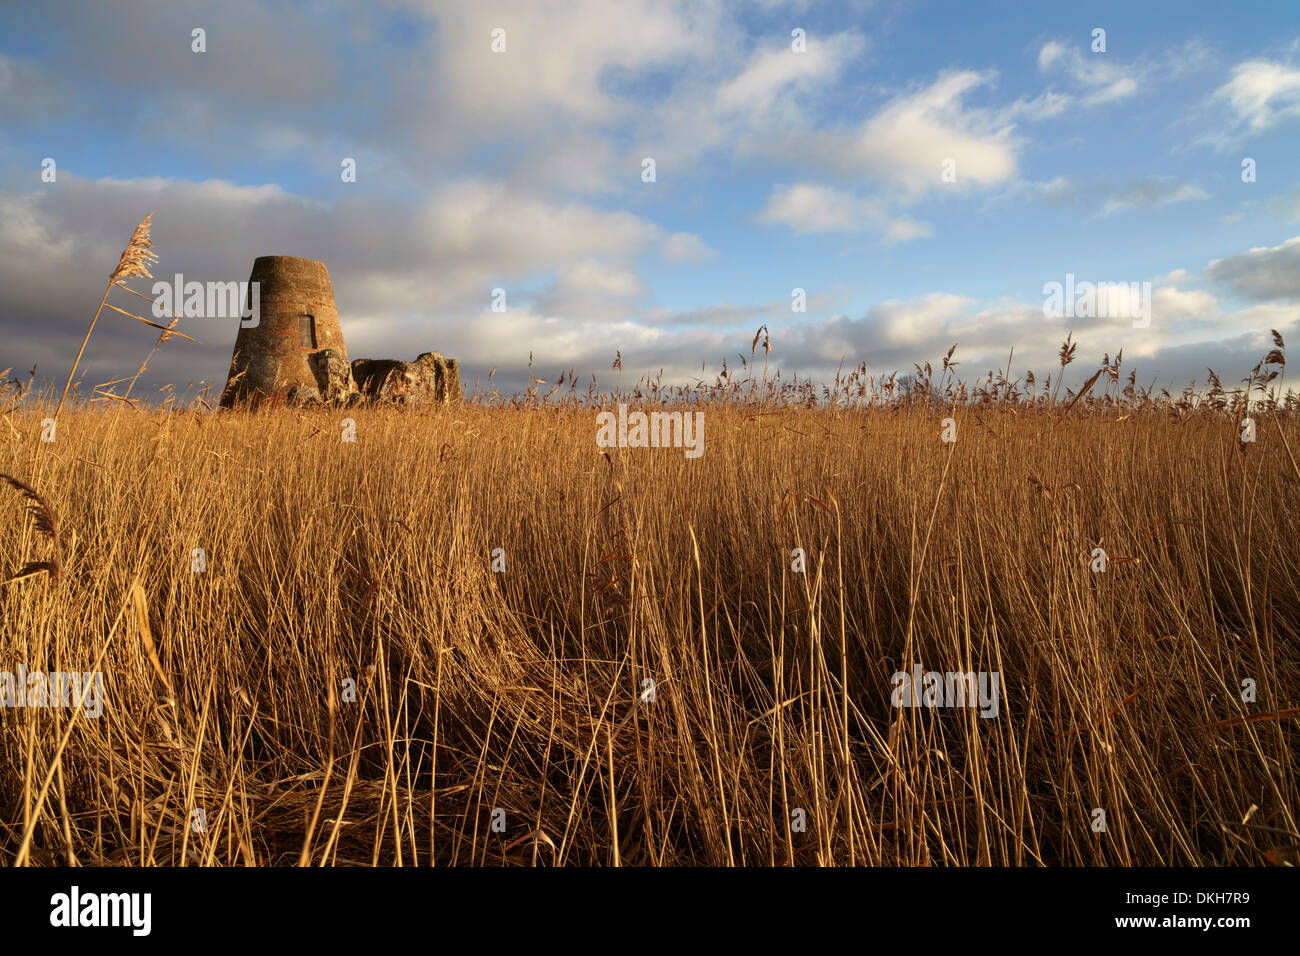 The remains of the 14th century St. Benet's Abbey and the windmill built within its walls near Ludham, Norfolk, England, UK Stock Photo